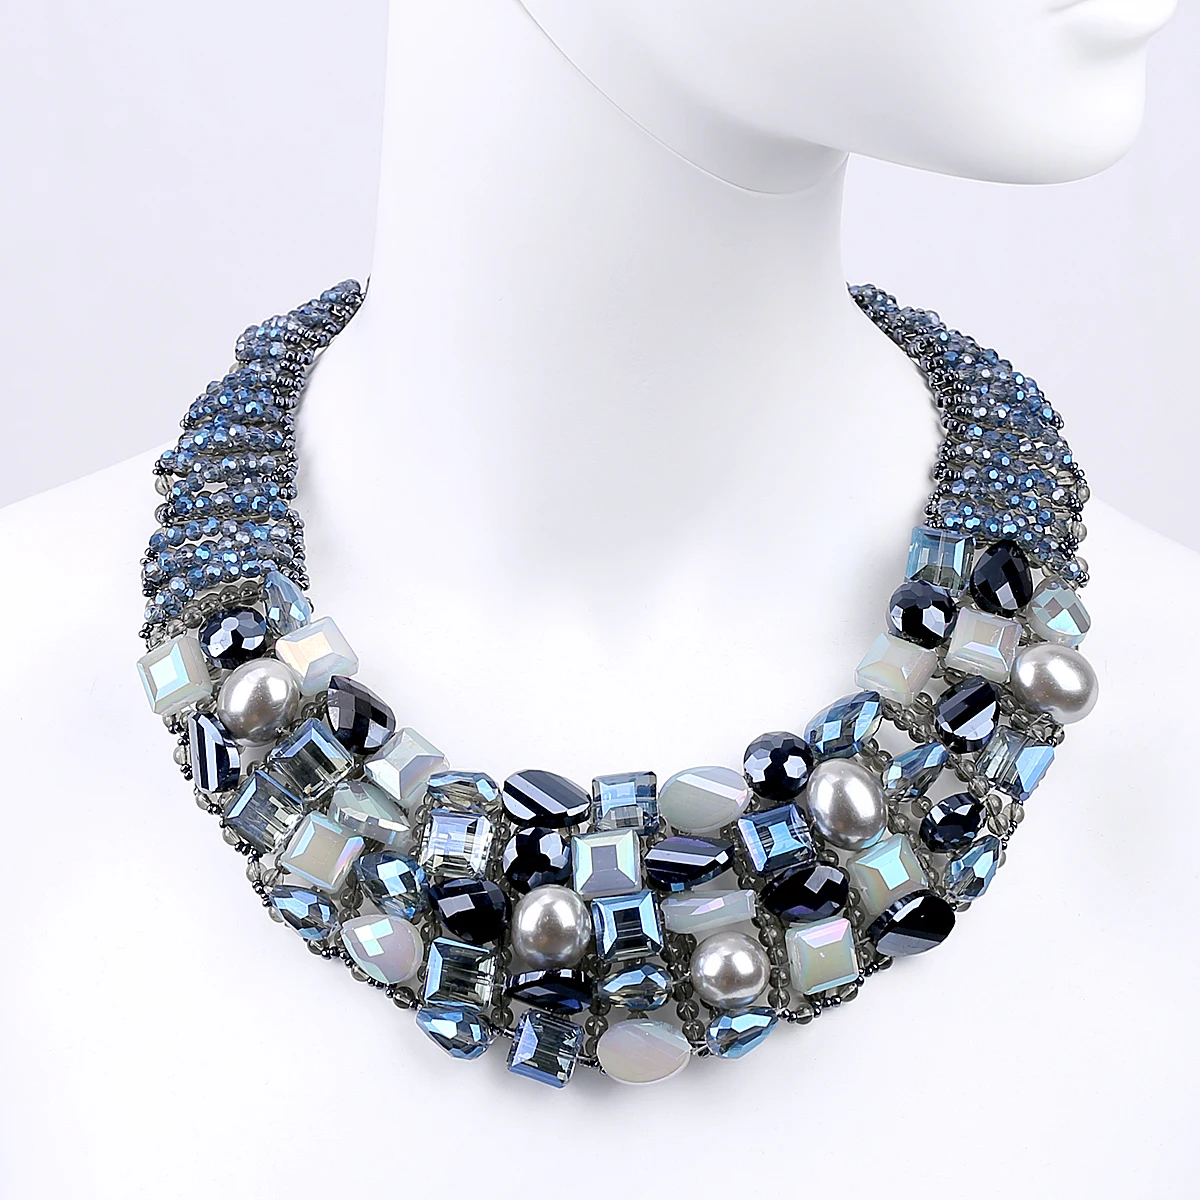 

Luxury New Statement Necklace Crystal and Synthetic Pearls Knitted Choker Necklace for Women Fashion Beaded Bib Collar Jewelry